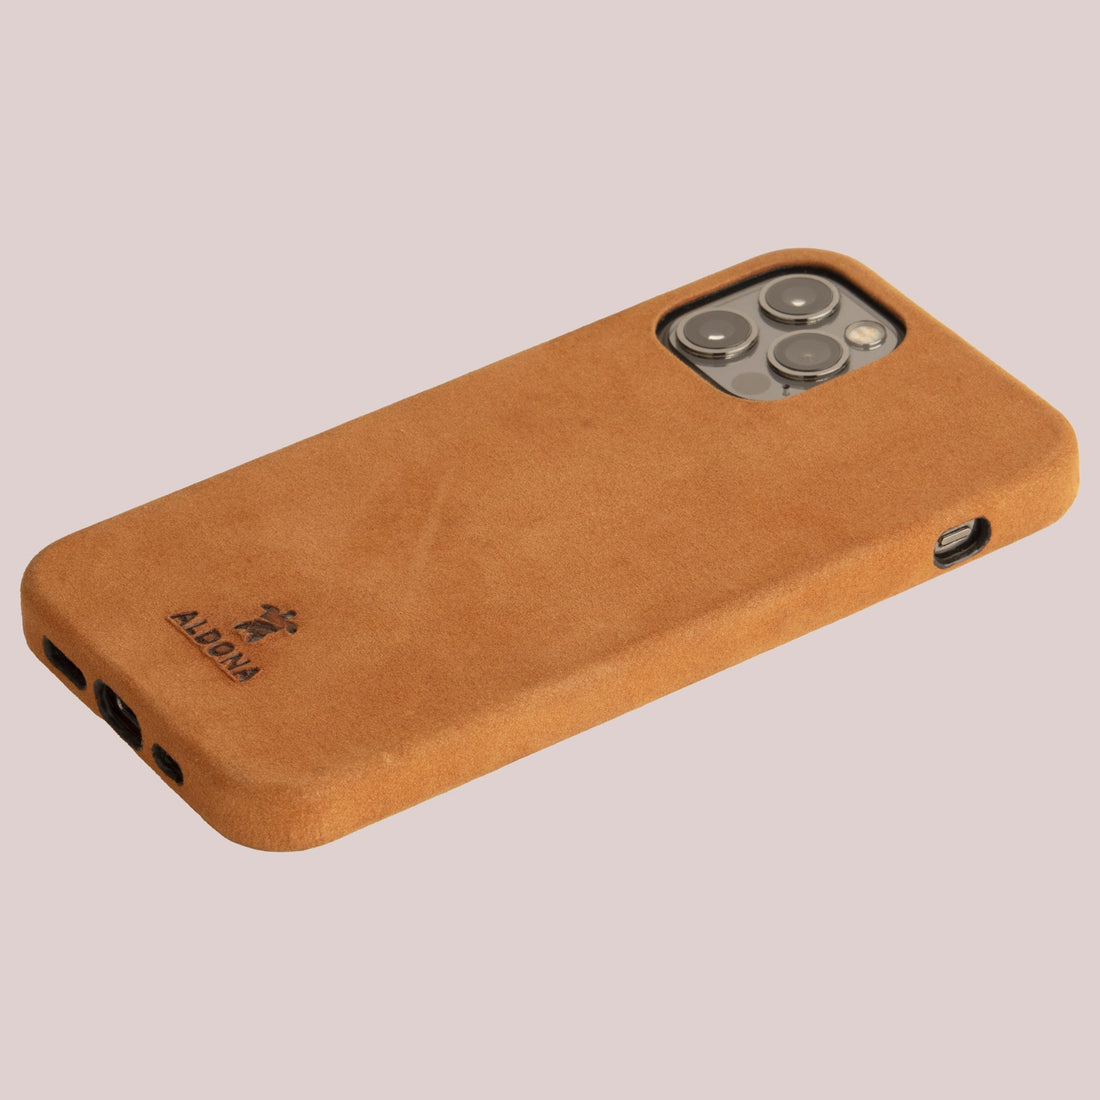 Kalon Case for iPhone 12 series with MagSafe Compatibility - Cognac